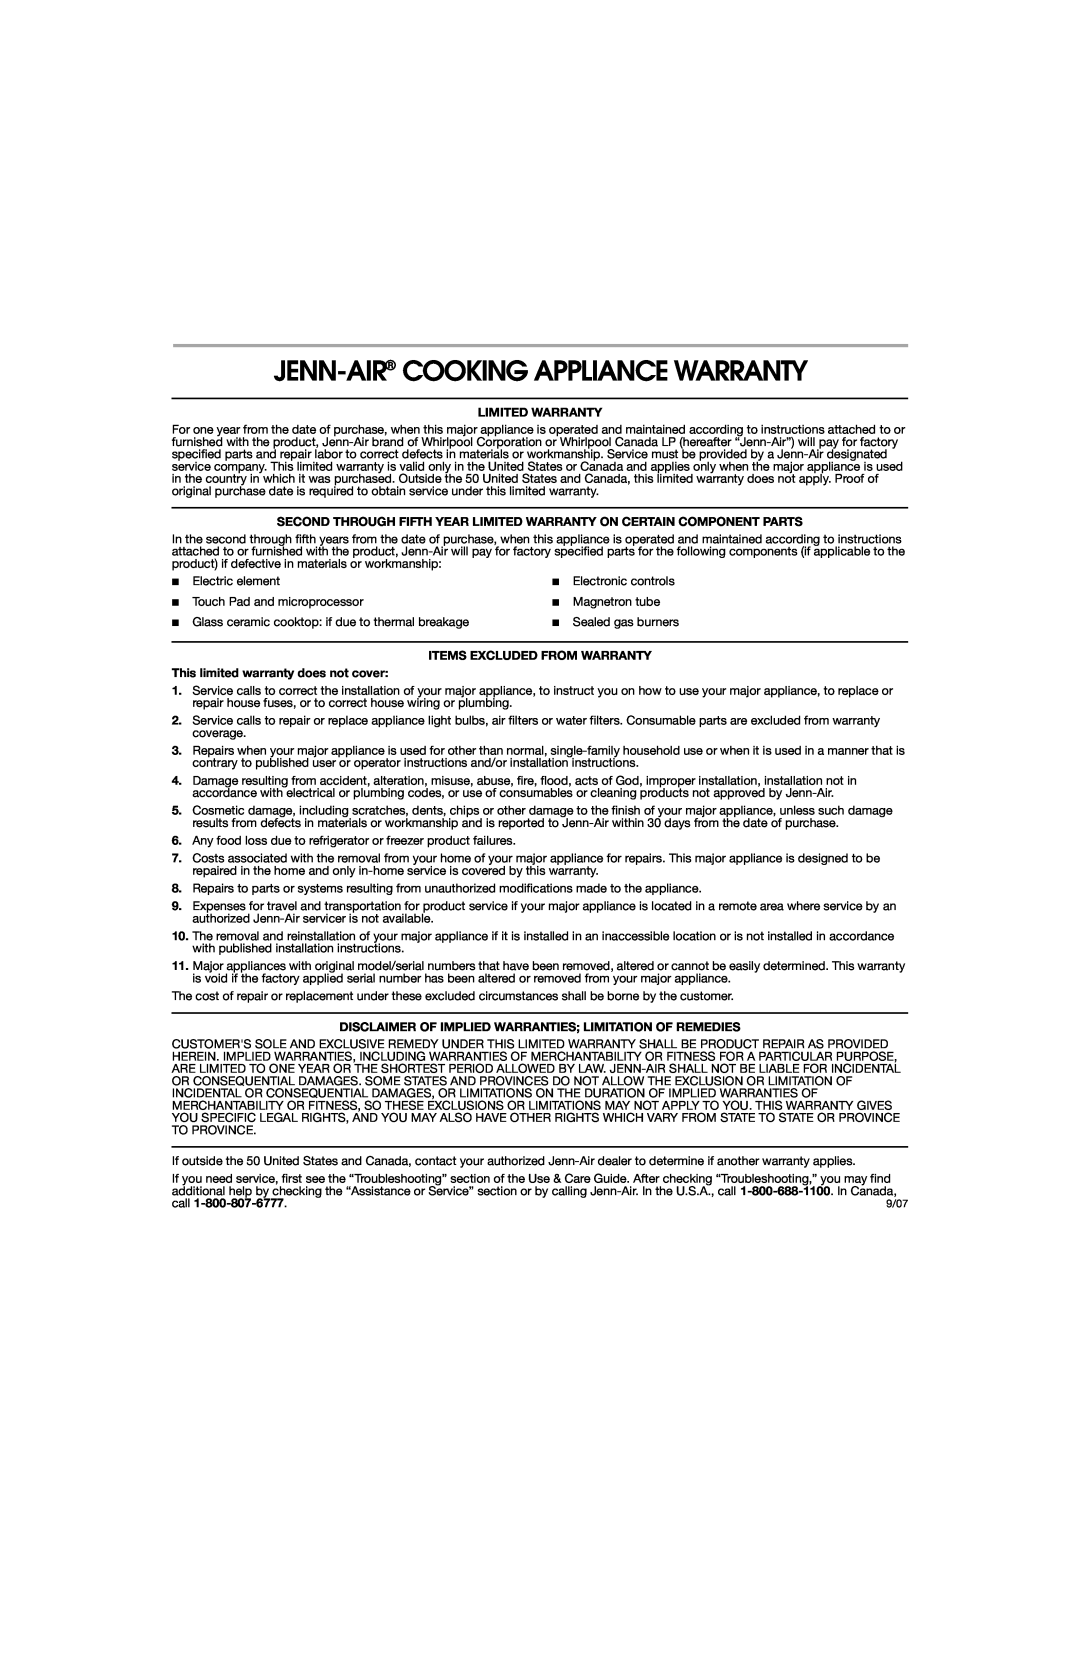 Jenn-Air 8113P753-60 Jenn-Air Cooking Appliance Warranty, Limited Warranty, Items Excluded From Warranty, call 